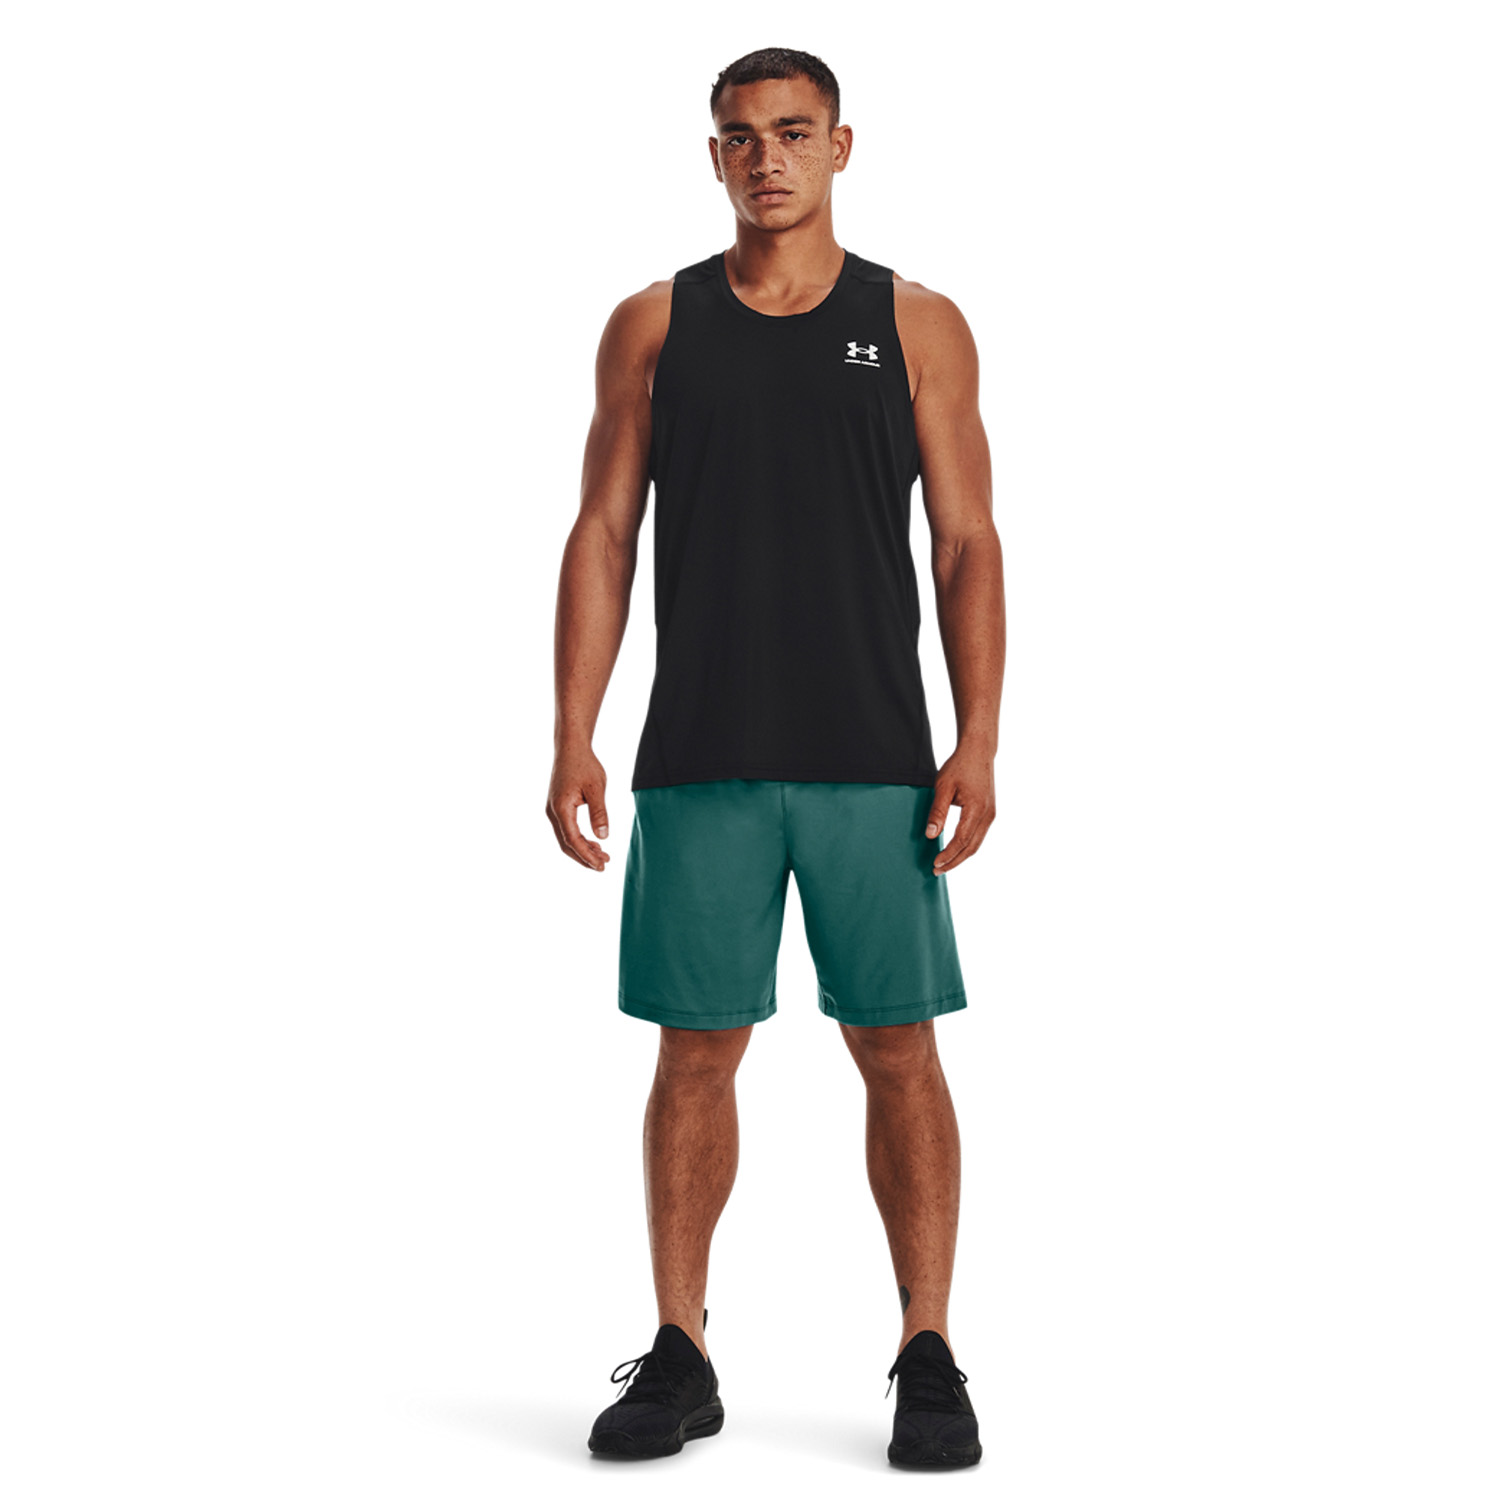 Under Armour Tech Vent 8in Shorts - Coastal Teal/Black